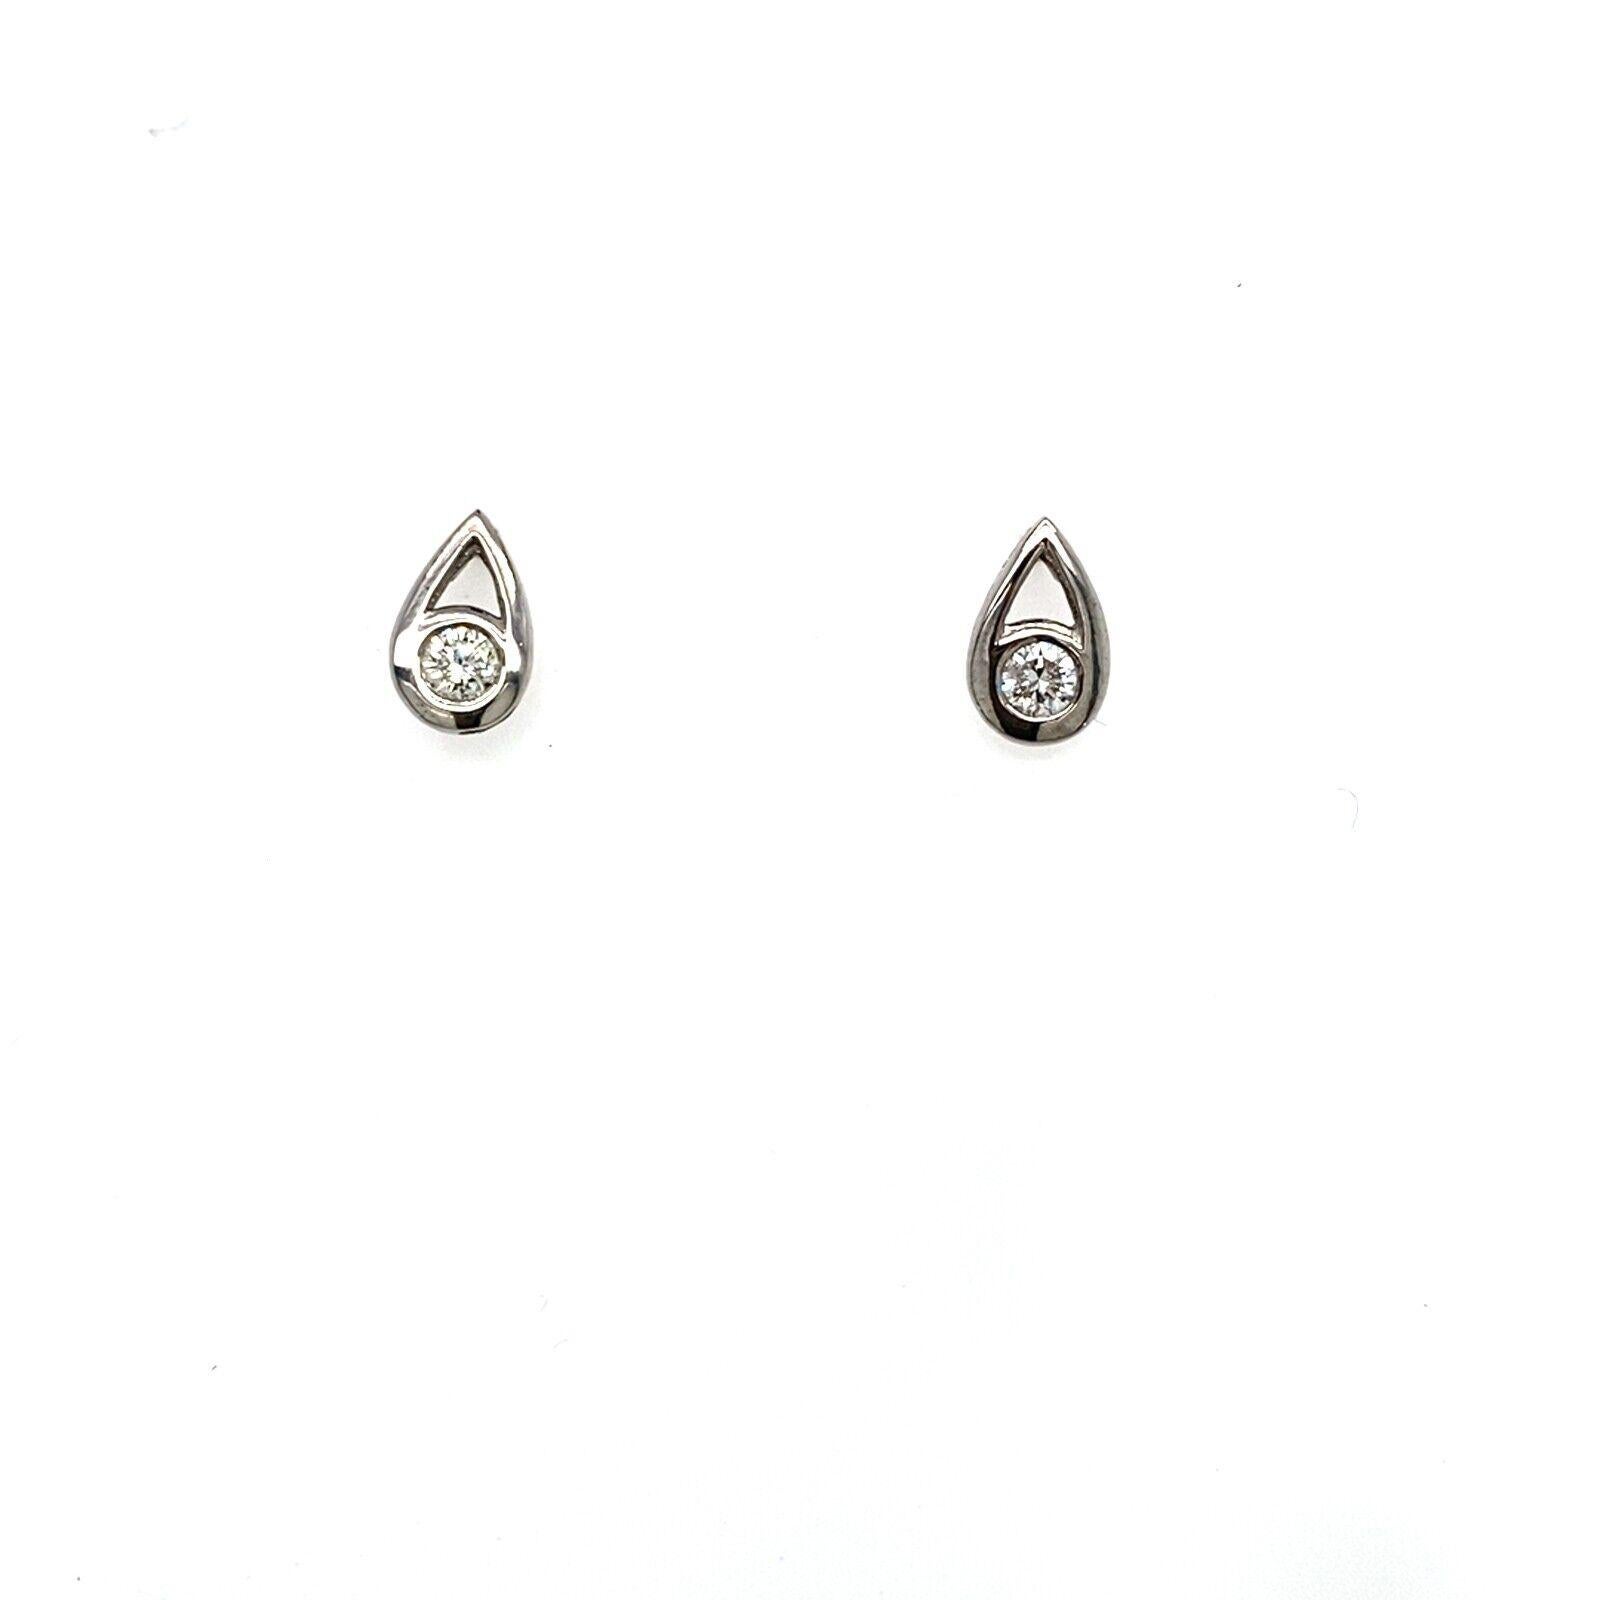 This pair of pear shape diamond earrings features a total of 0.30ct of round brilliant cut diamonds set in 18ct white gold. It's elegant, classic, and timeless. It's perfect for everyday and can be worn with any outfit.

Additional Information: